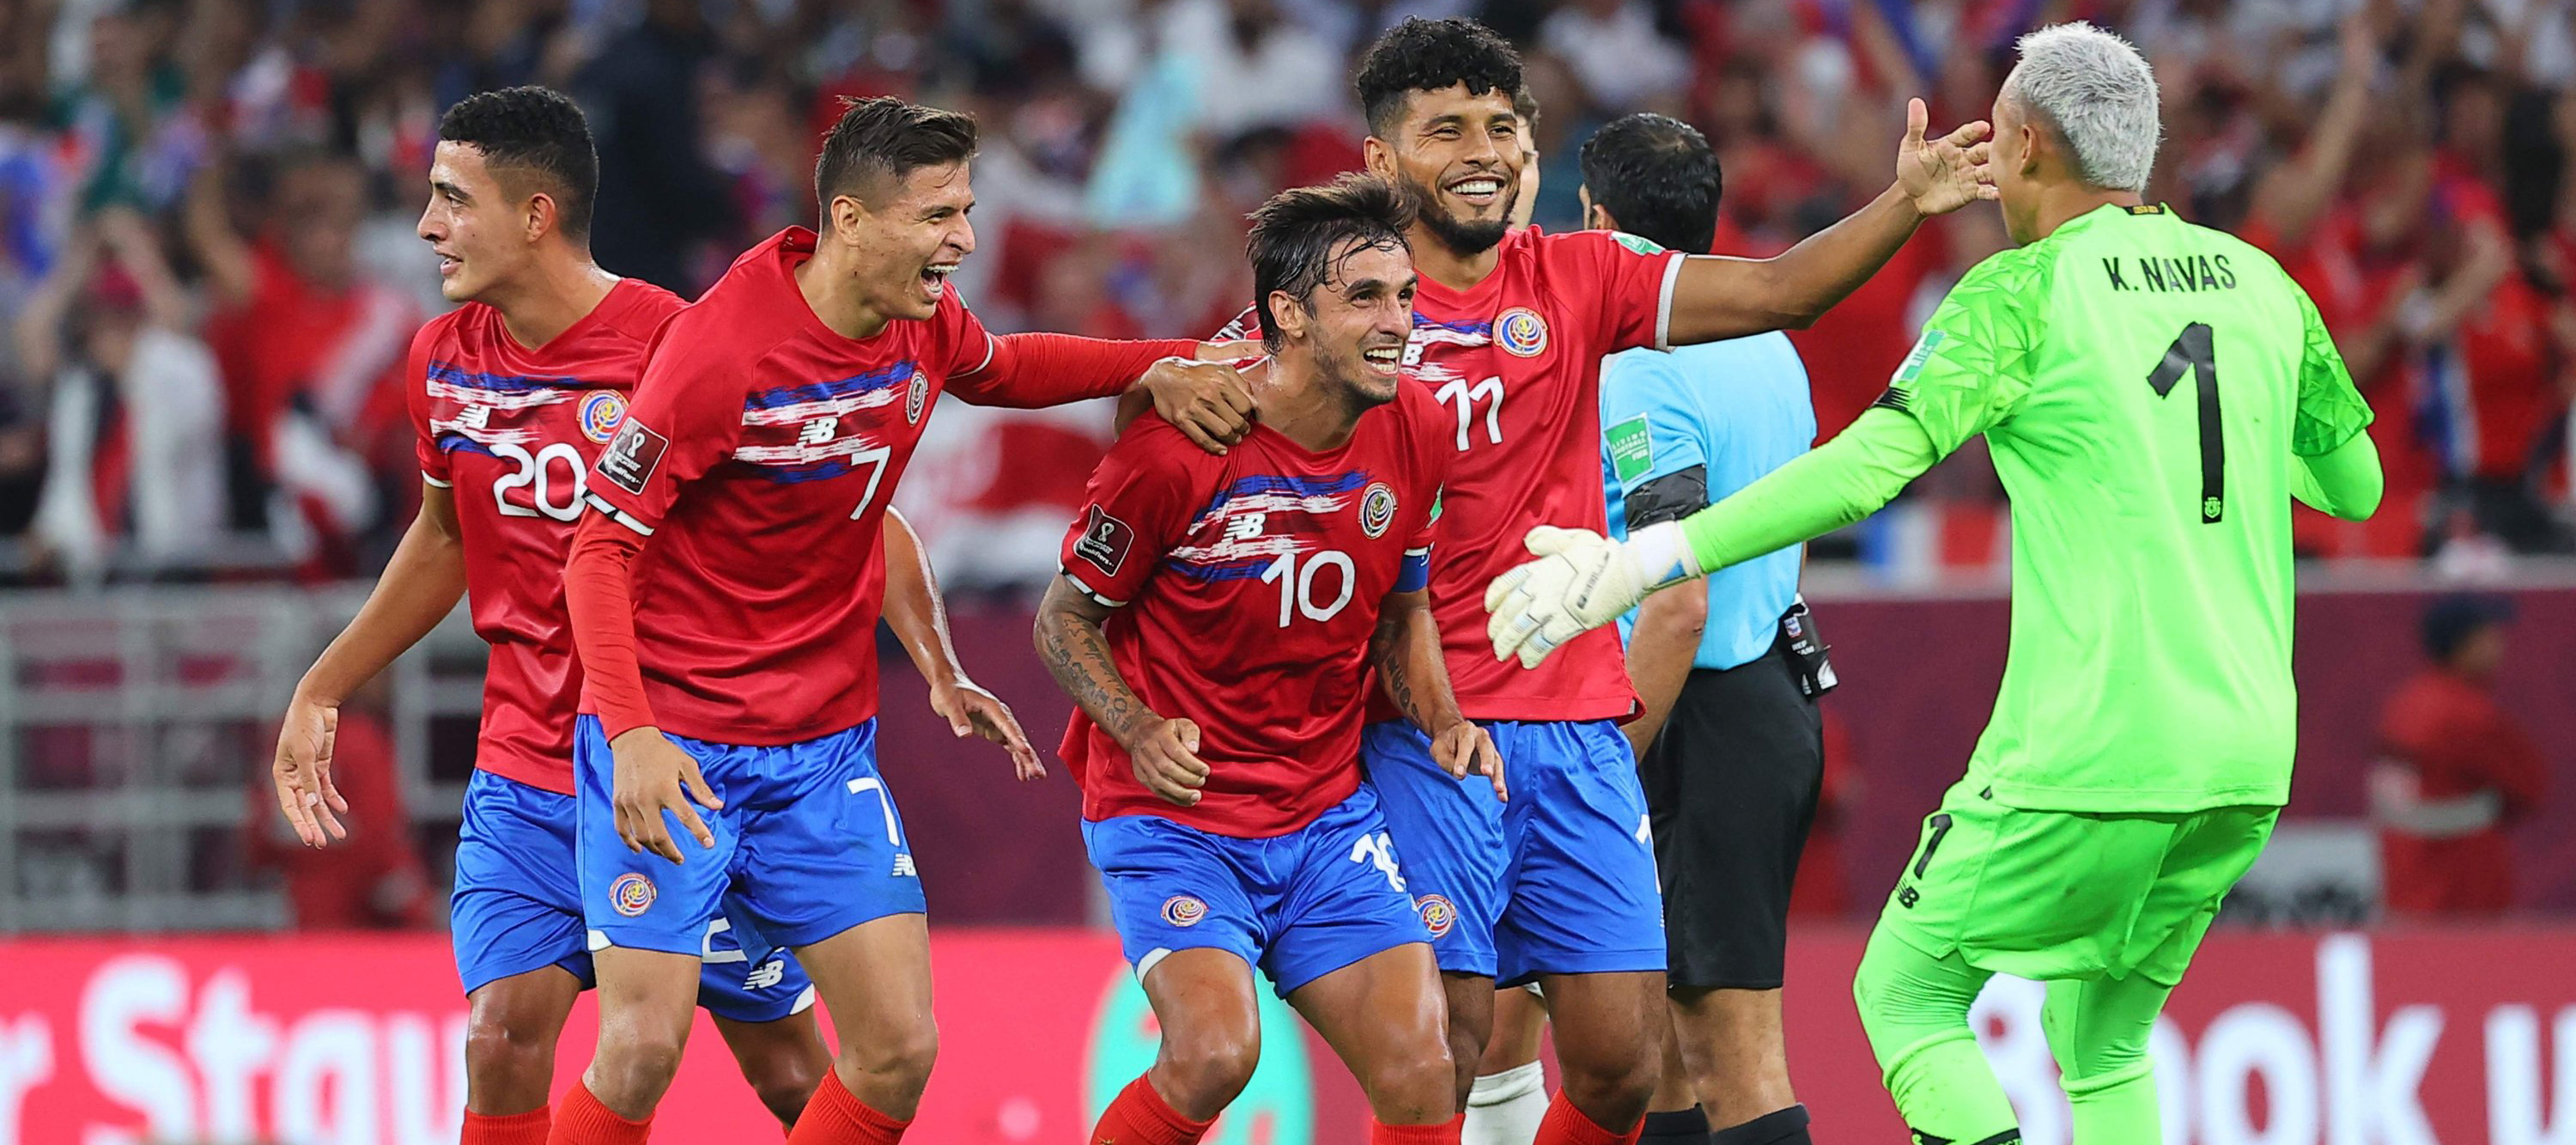 Costa Rica Odds to Win the FIFA World Cup and Will They Move to Round of 16